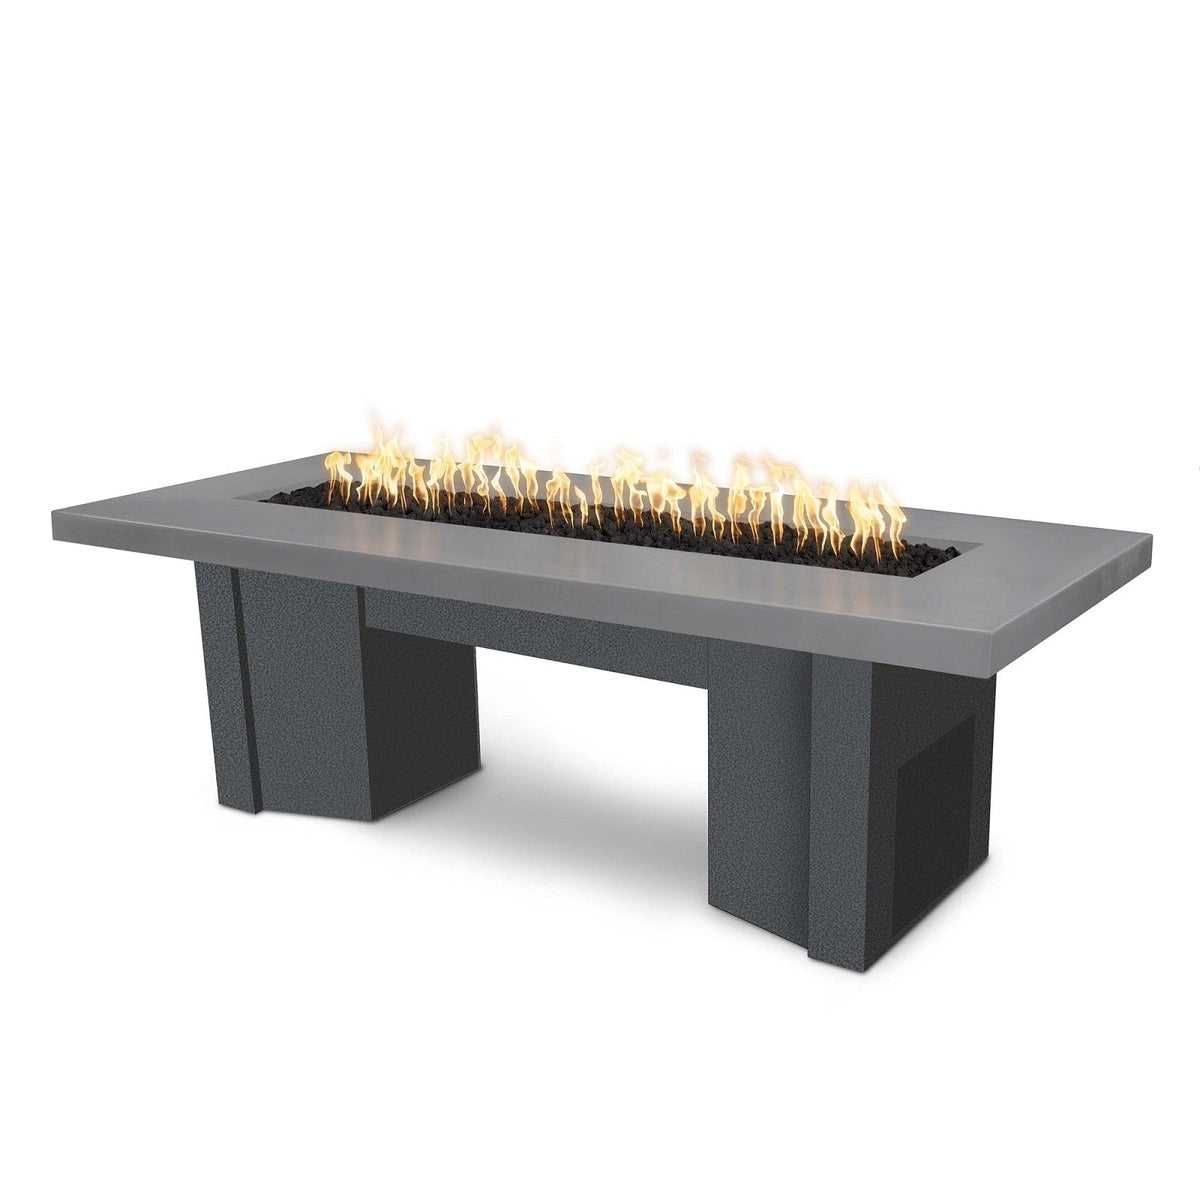 The Outdoor Plus Fire Features Natural Gray (-NGY) / Silver Vein Powder Coated Steel (-SLV) The Outdoor Plus 60&quot; Alameda Fire Table Smooth Concrete in Liquid Propane - Match Lit with Flame Sense System / OPT-ALMGFRC60FSML-LP